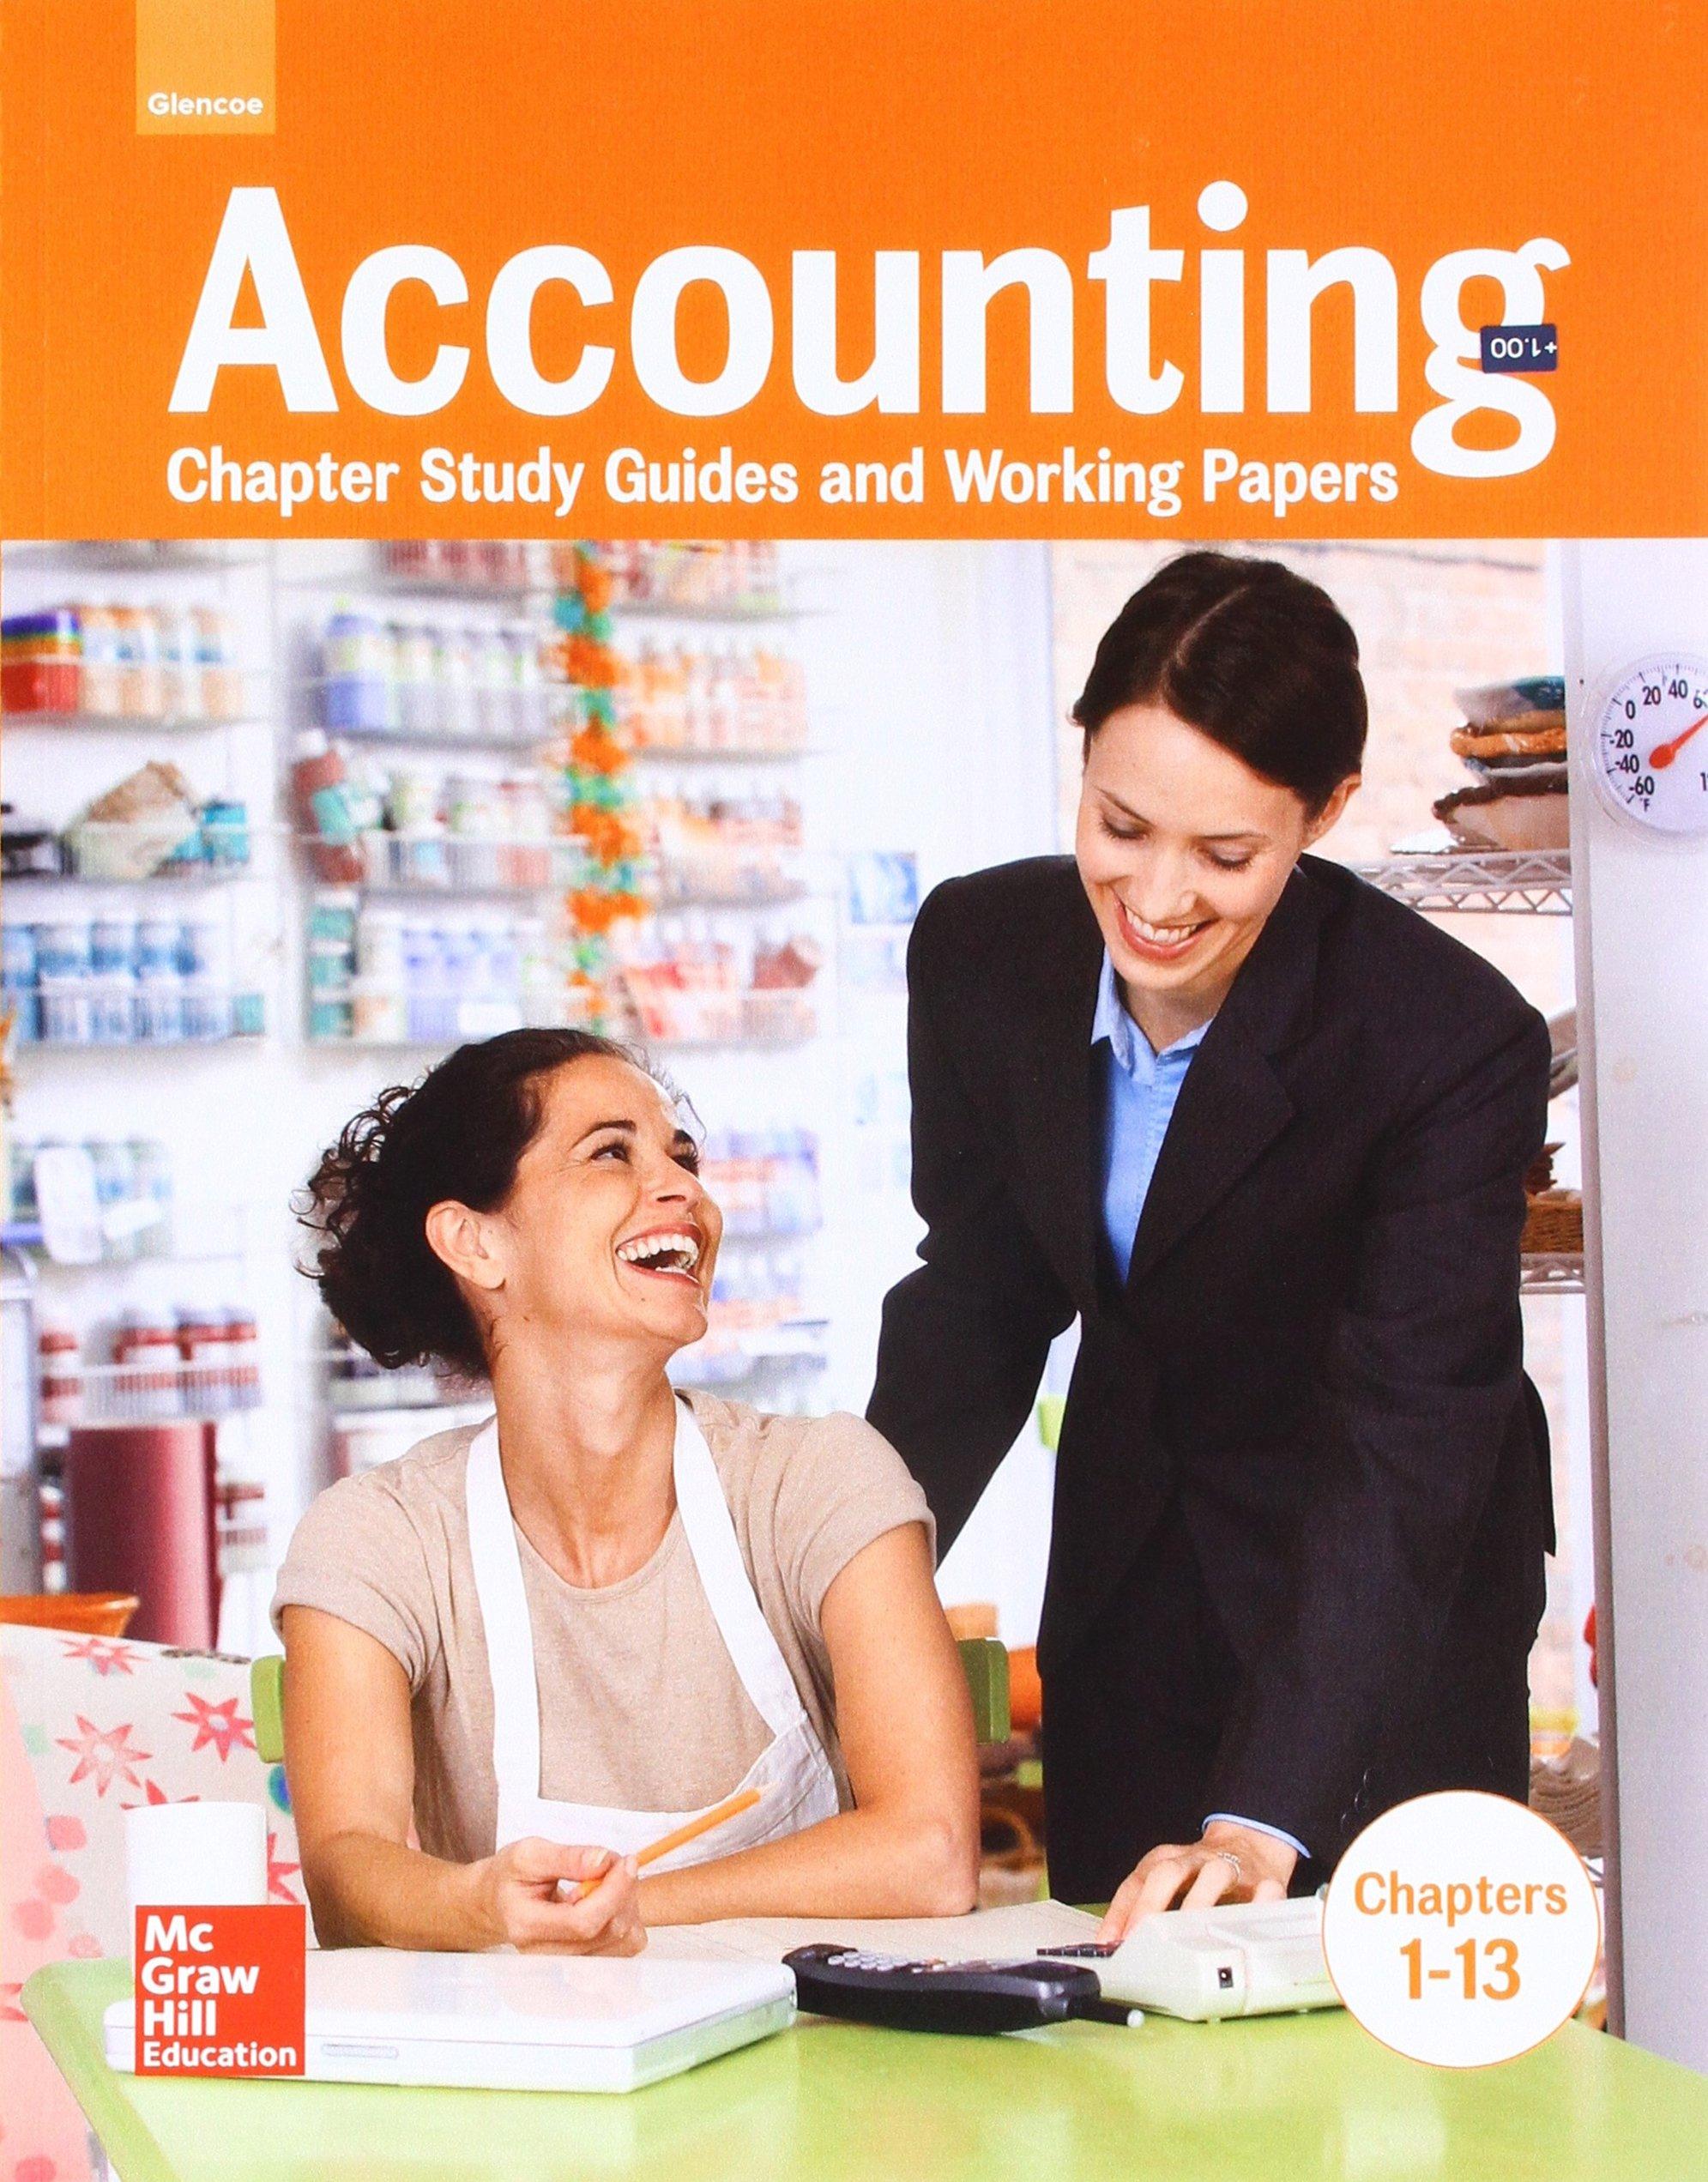 accounting chapter study guides and working papers chapters 1-13 1st edition guerrieri, mcgraw hill